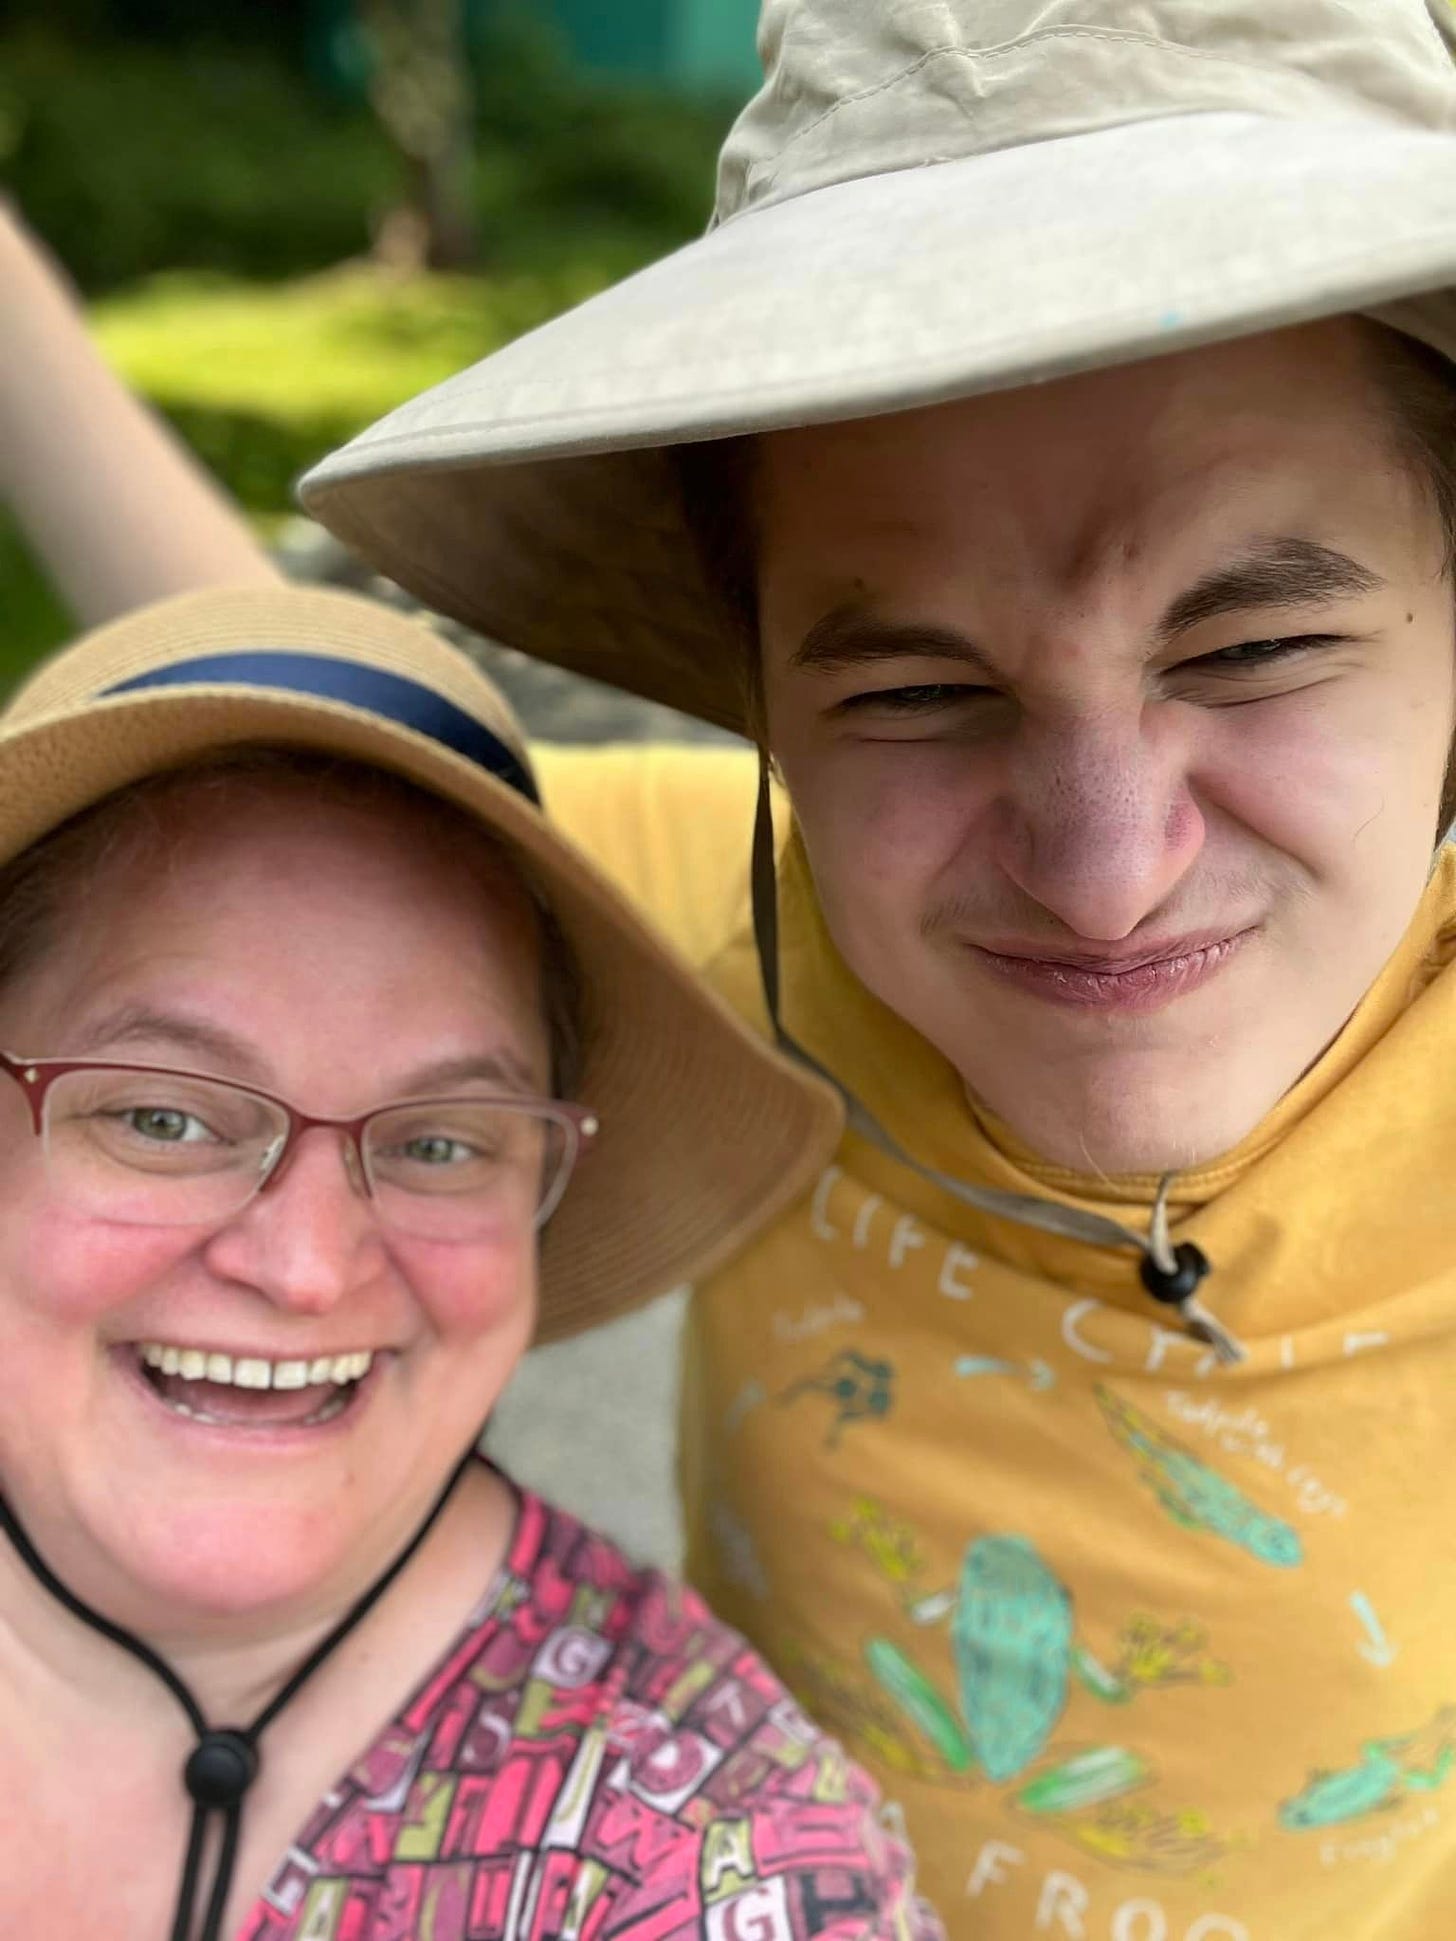 May be an image of 2 people, people smiling and hat